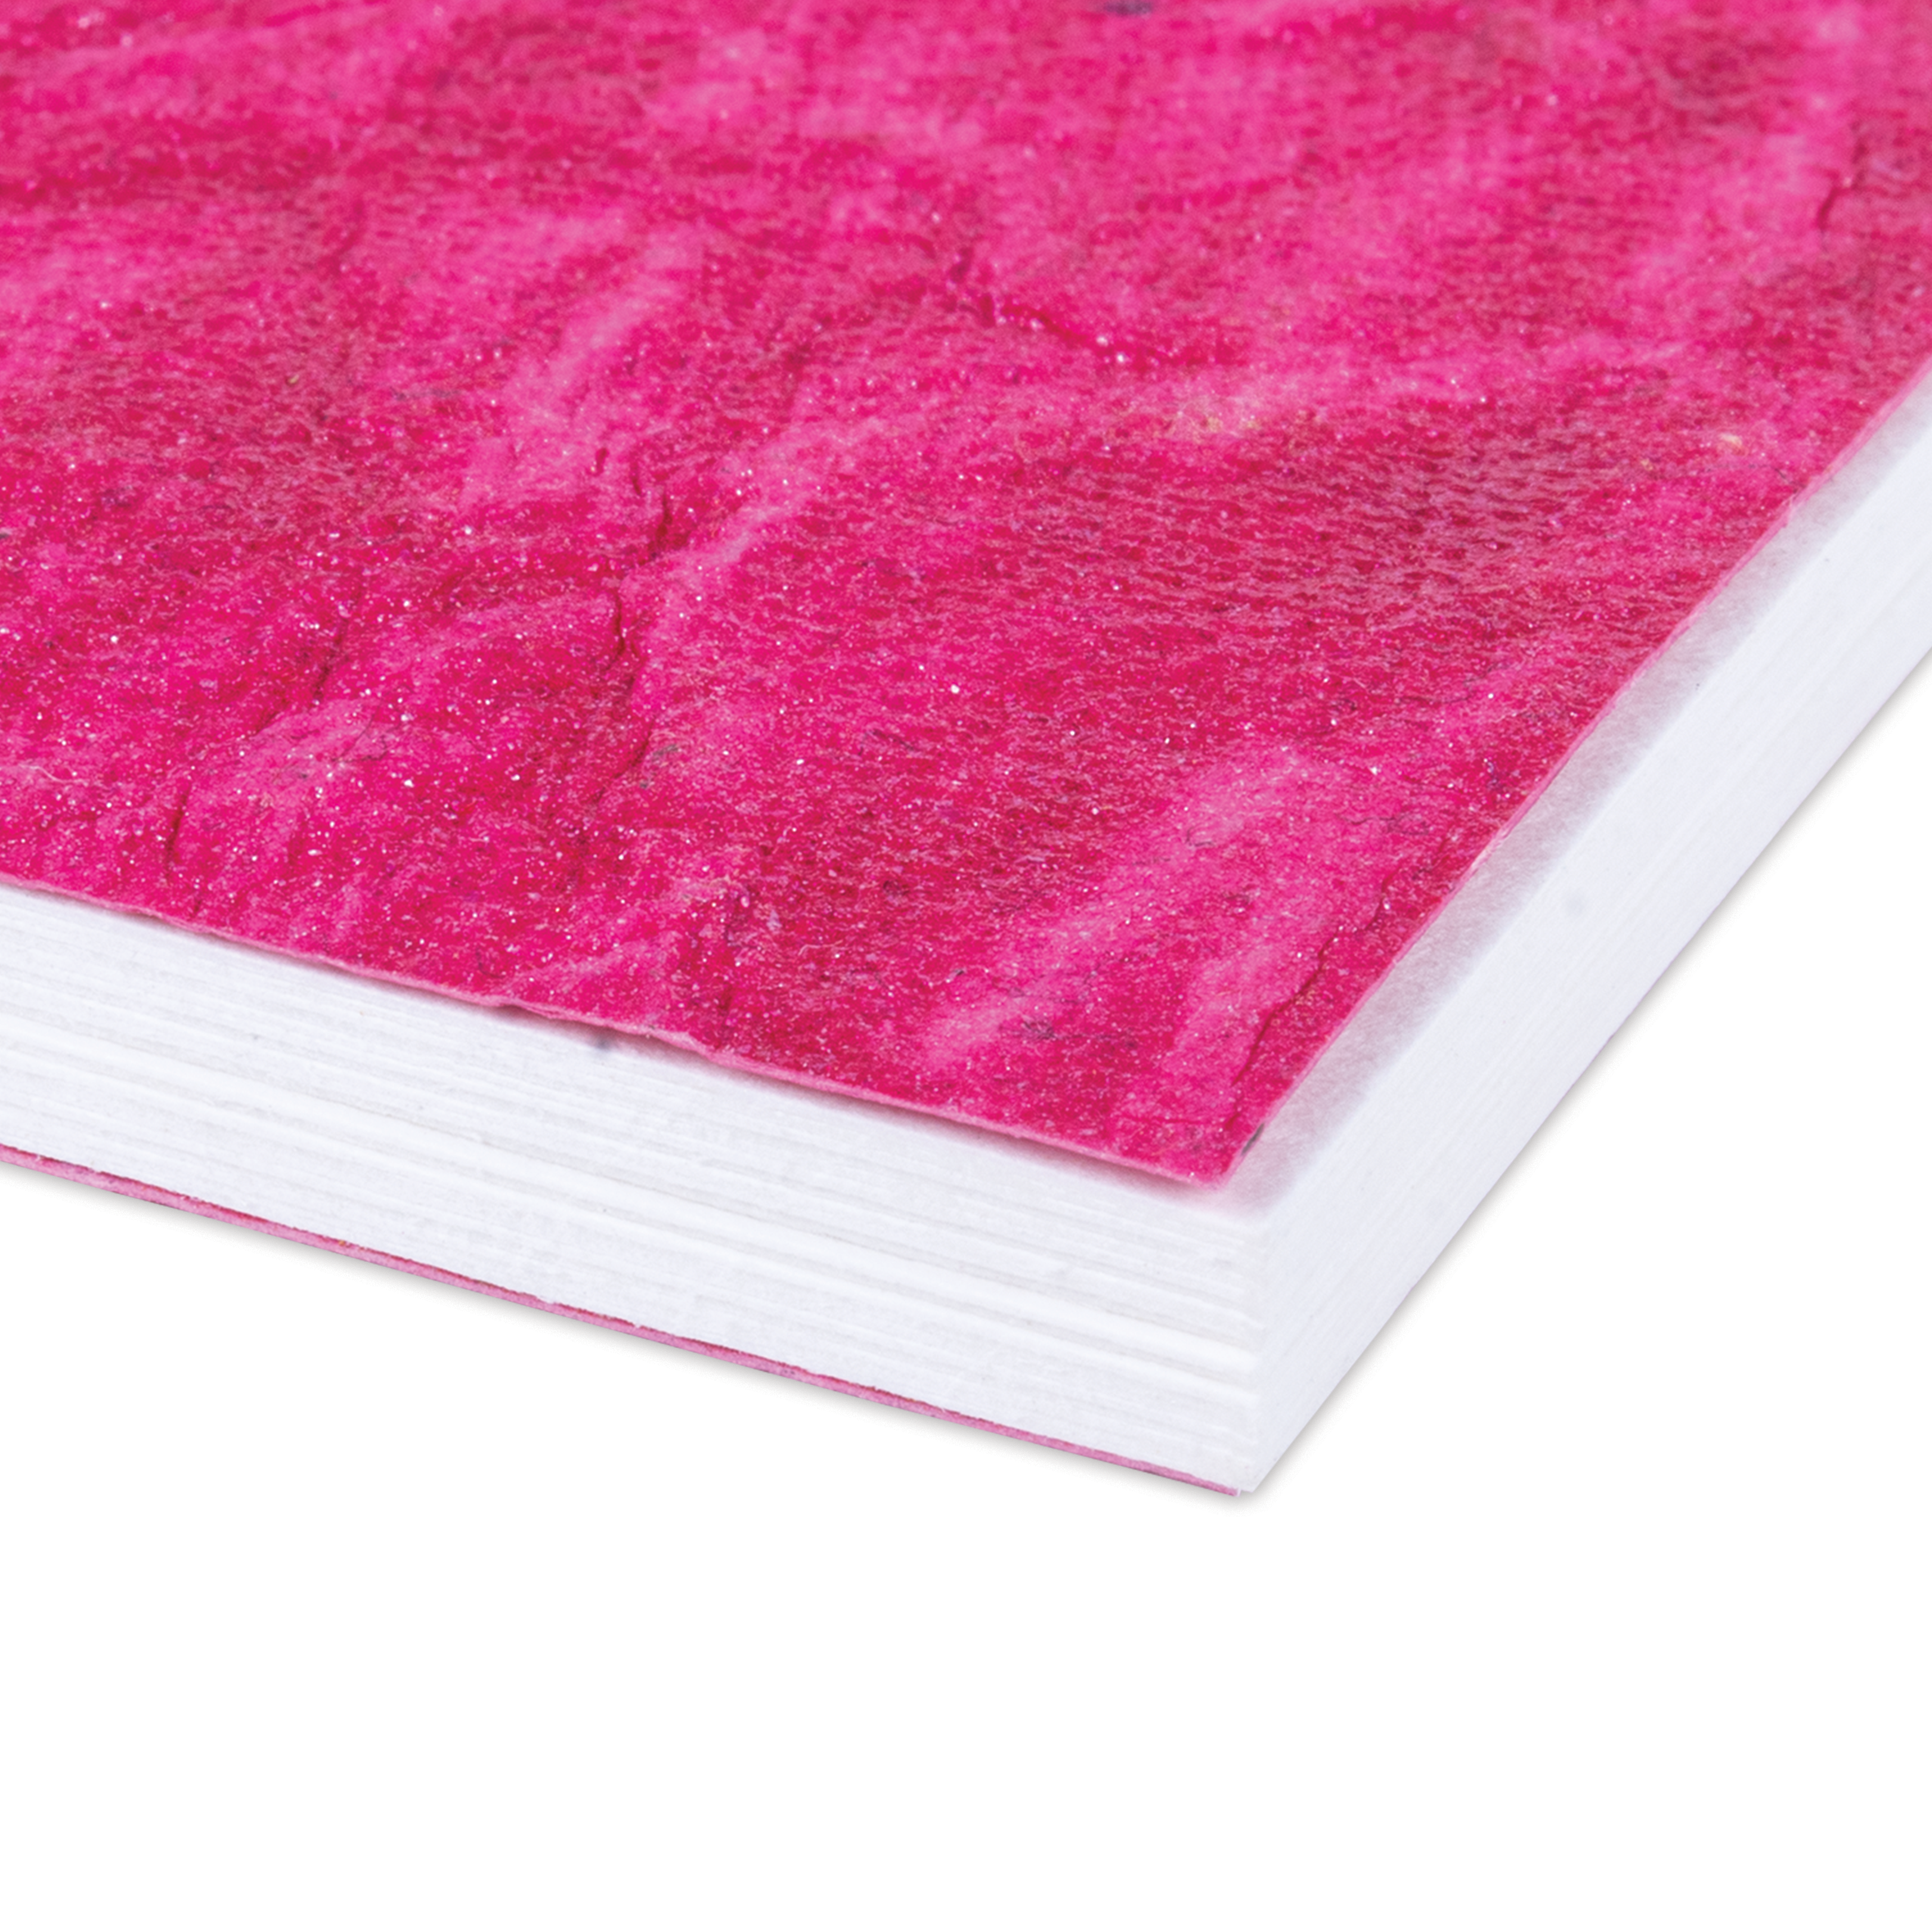 Simply Chic Pocket Spiral Bound Notebook with Leather Paper Cover Page Fuchsia Pink Artist Paper A6 115gsm 20Sheets 1 Book